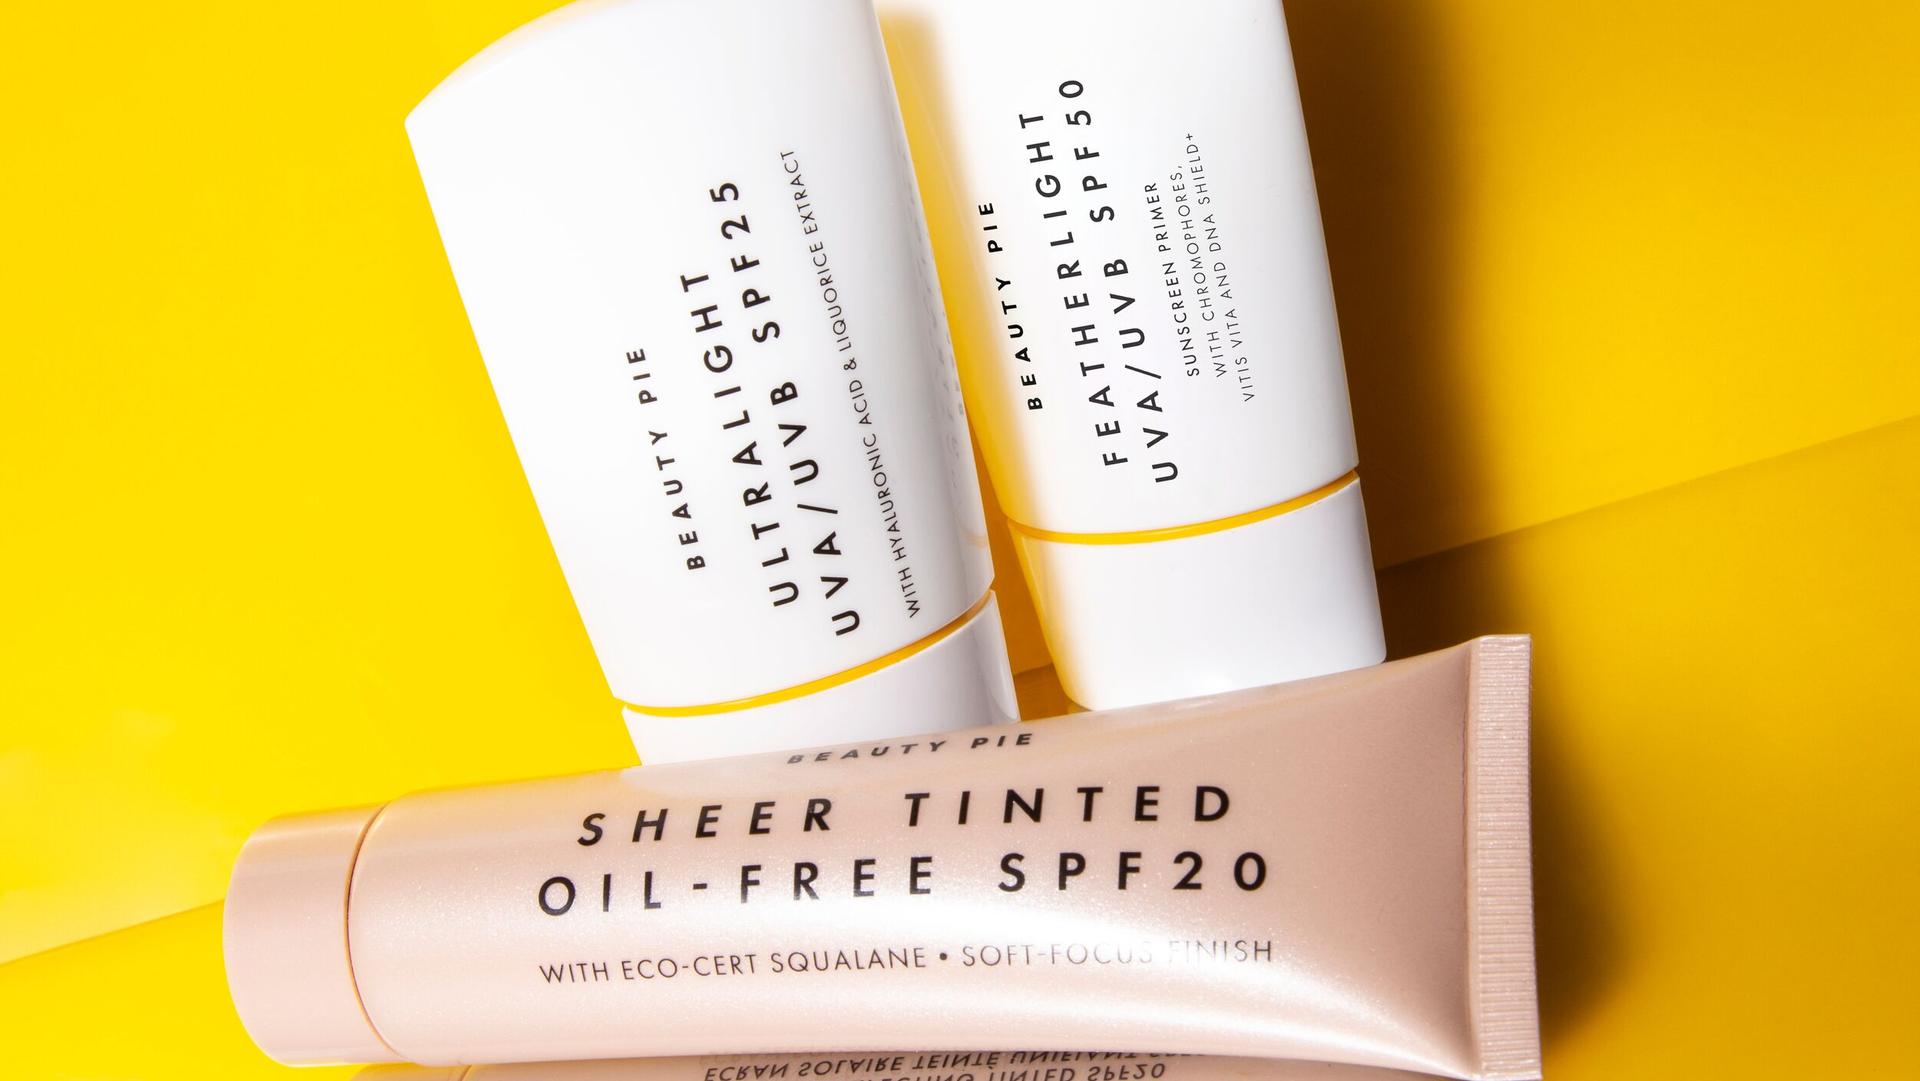 SPF50 Products by BEAUTY PIE